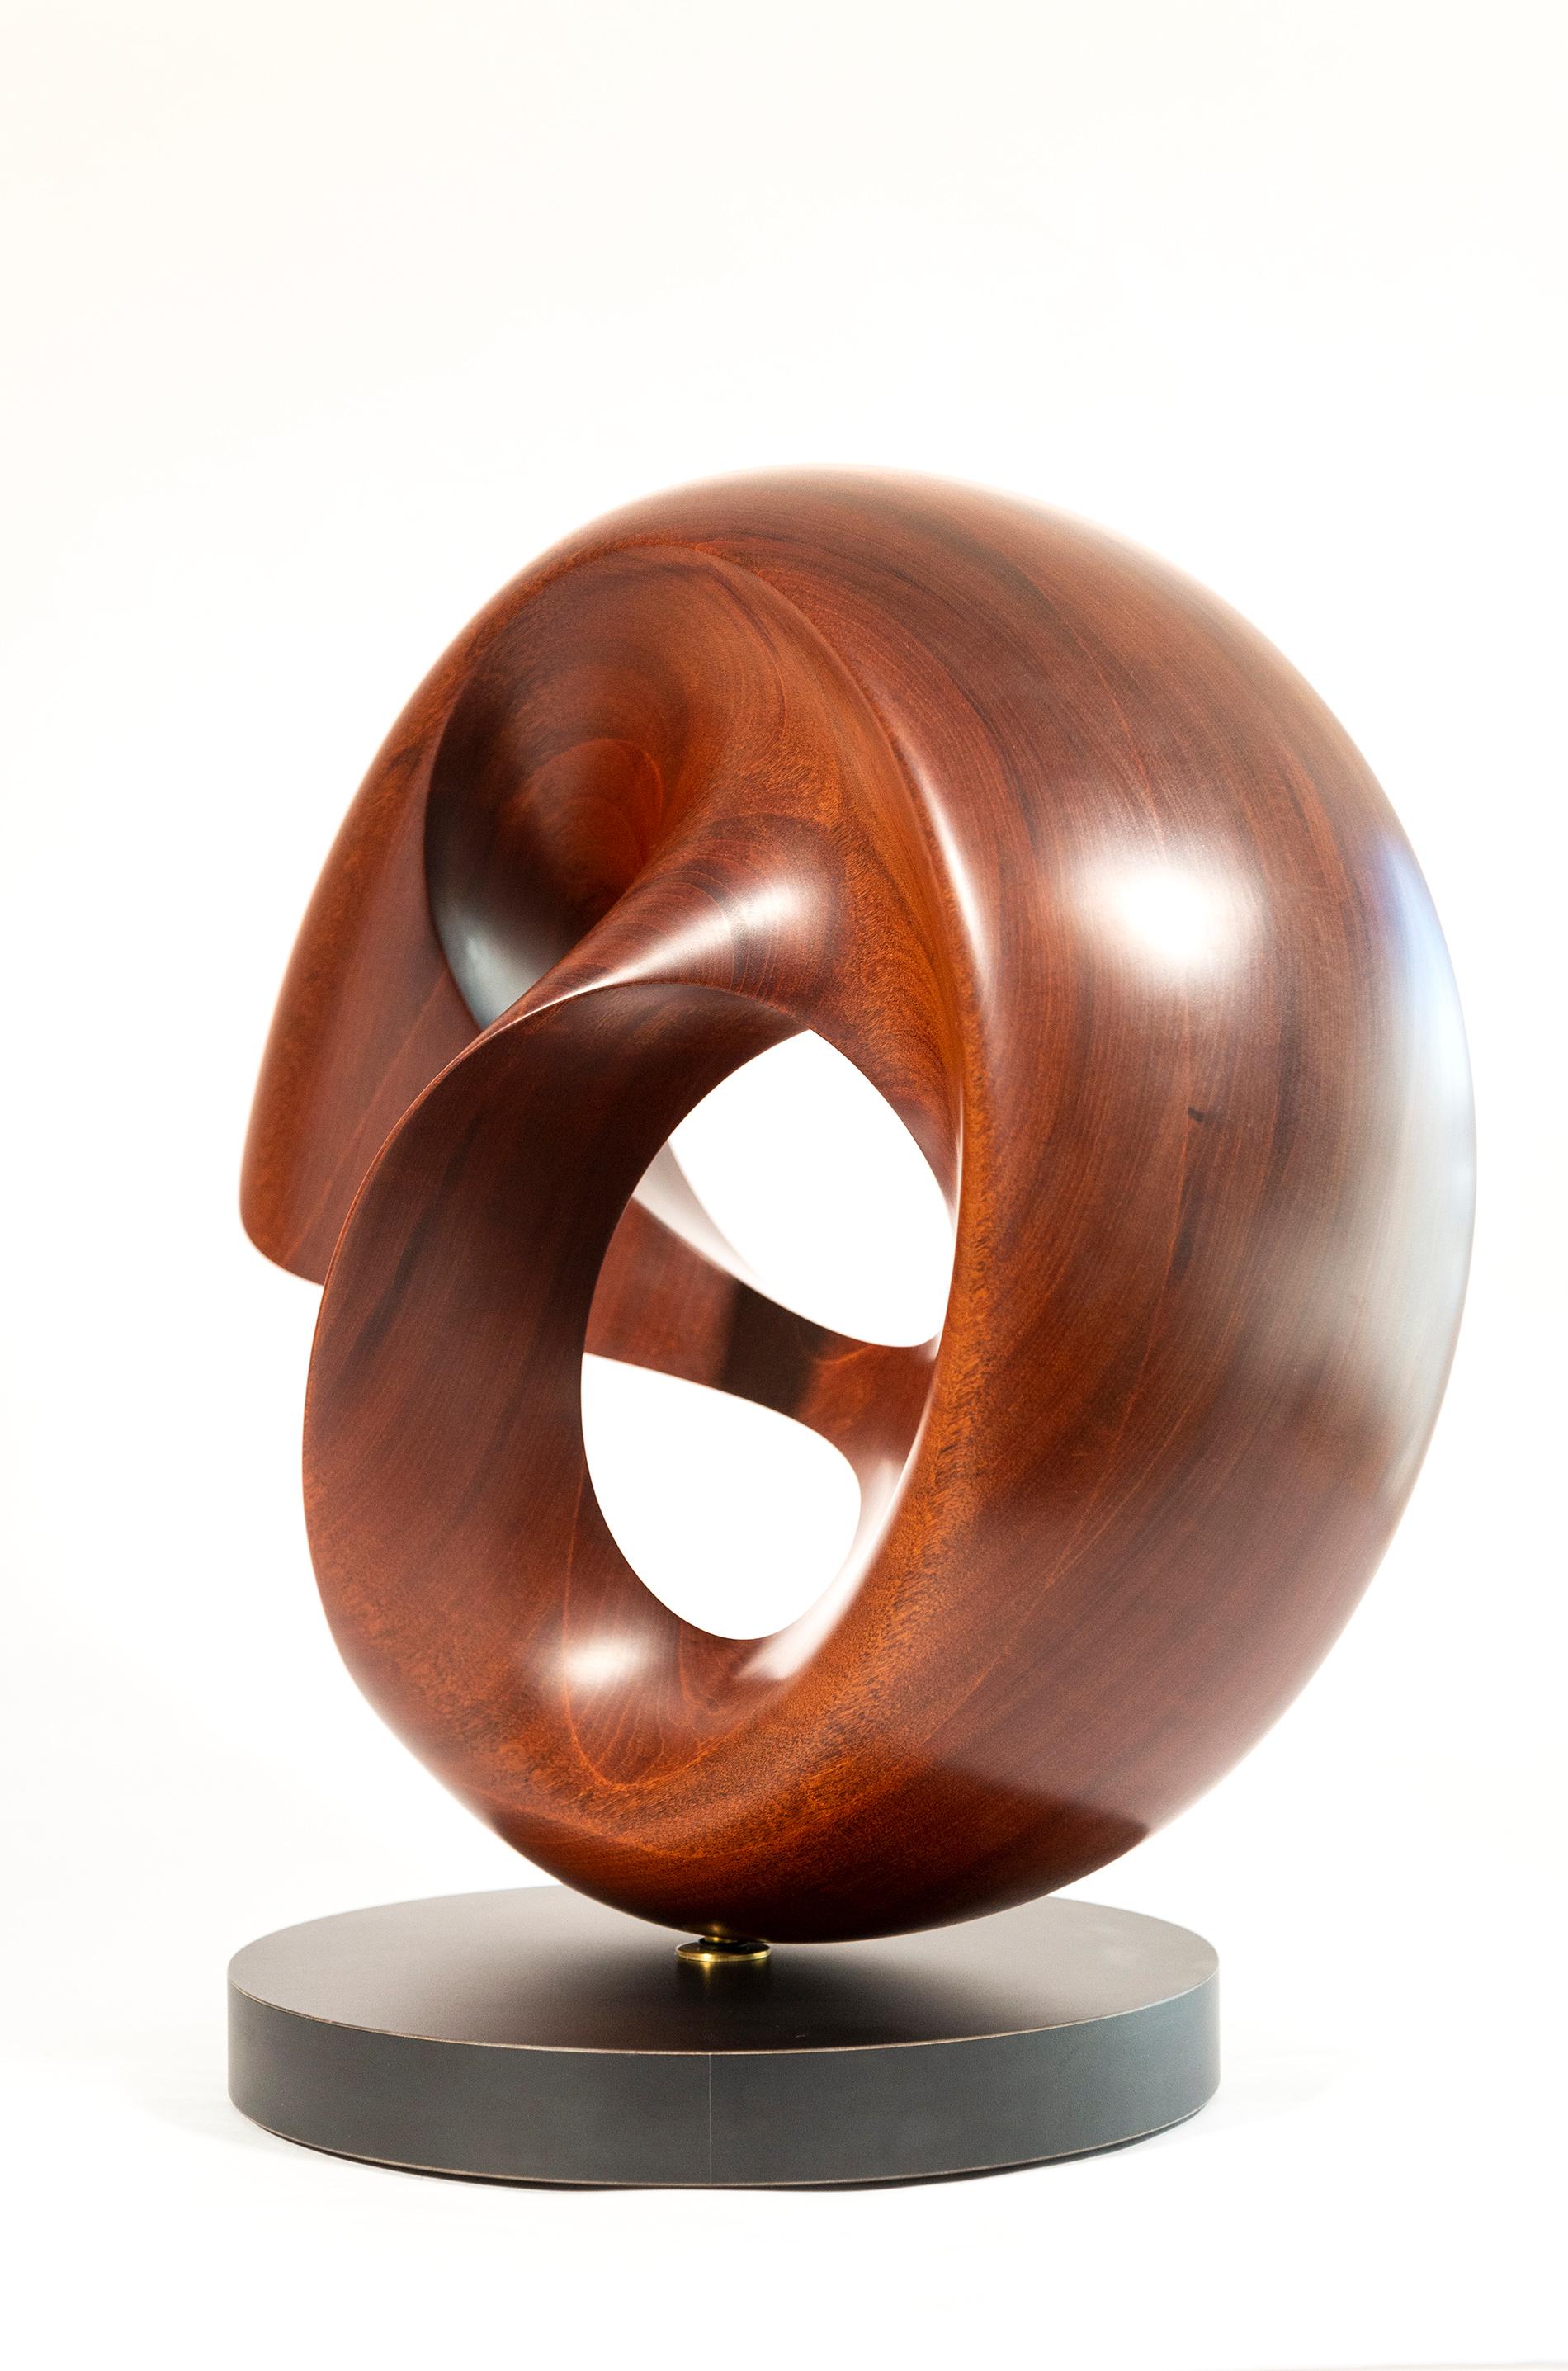 Fanfare - smooth, polished, abstract, contemporary, mahogany carved sculpture For Sale 1